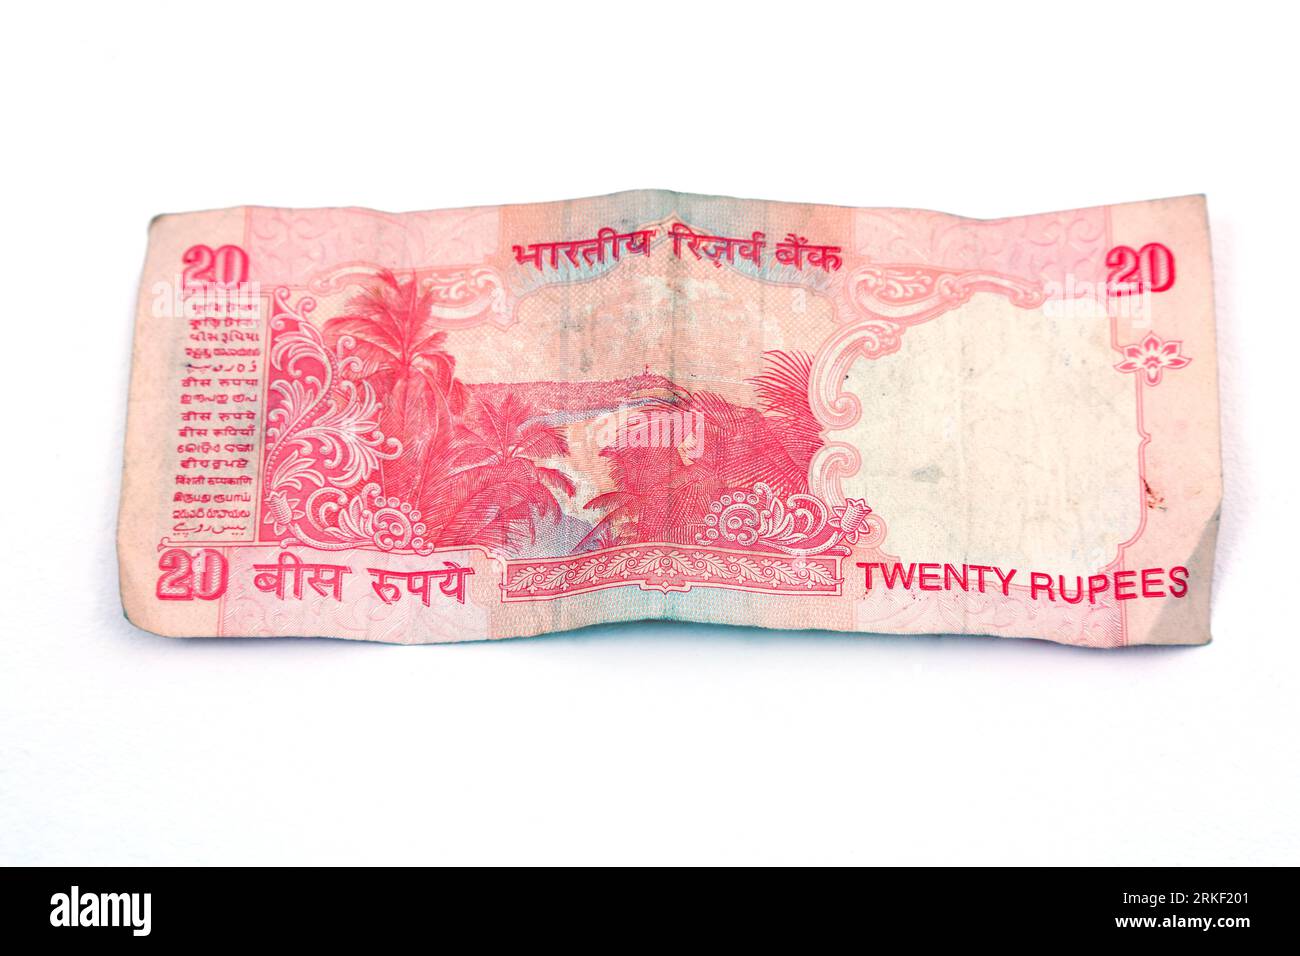 Reserve Bank of India Mahatma Gandhi Series 20 Rupees Banknote Issued 2001- Current Reverse Side Showing Mount Harriet Stock Photo